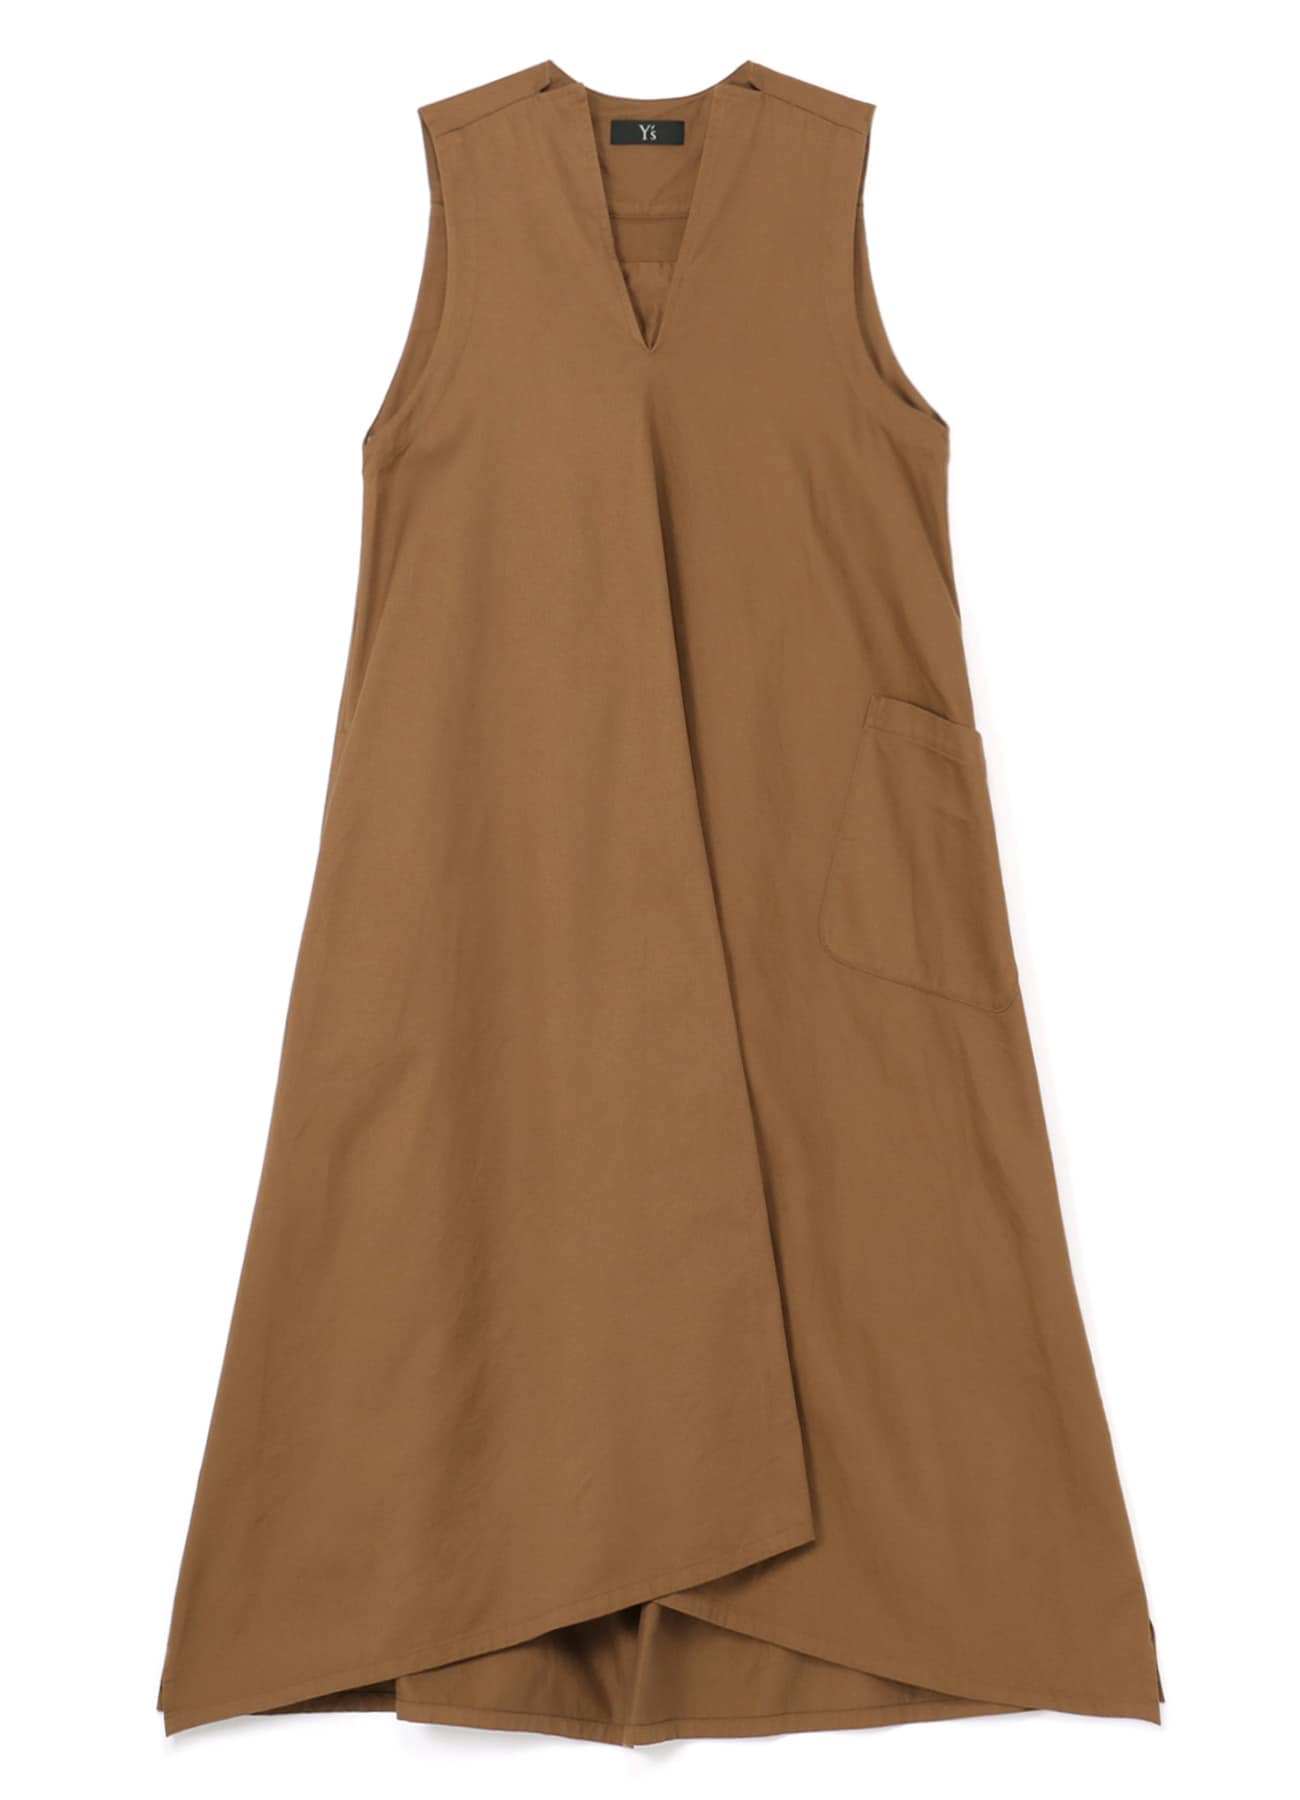 Y's BORN PRODUCT] COTTON TWILL V-NECK DRESS(S Brown): Y's｜THE 